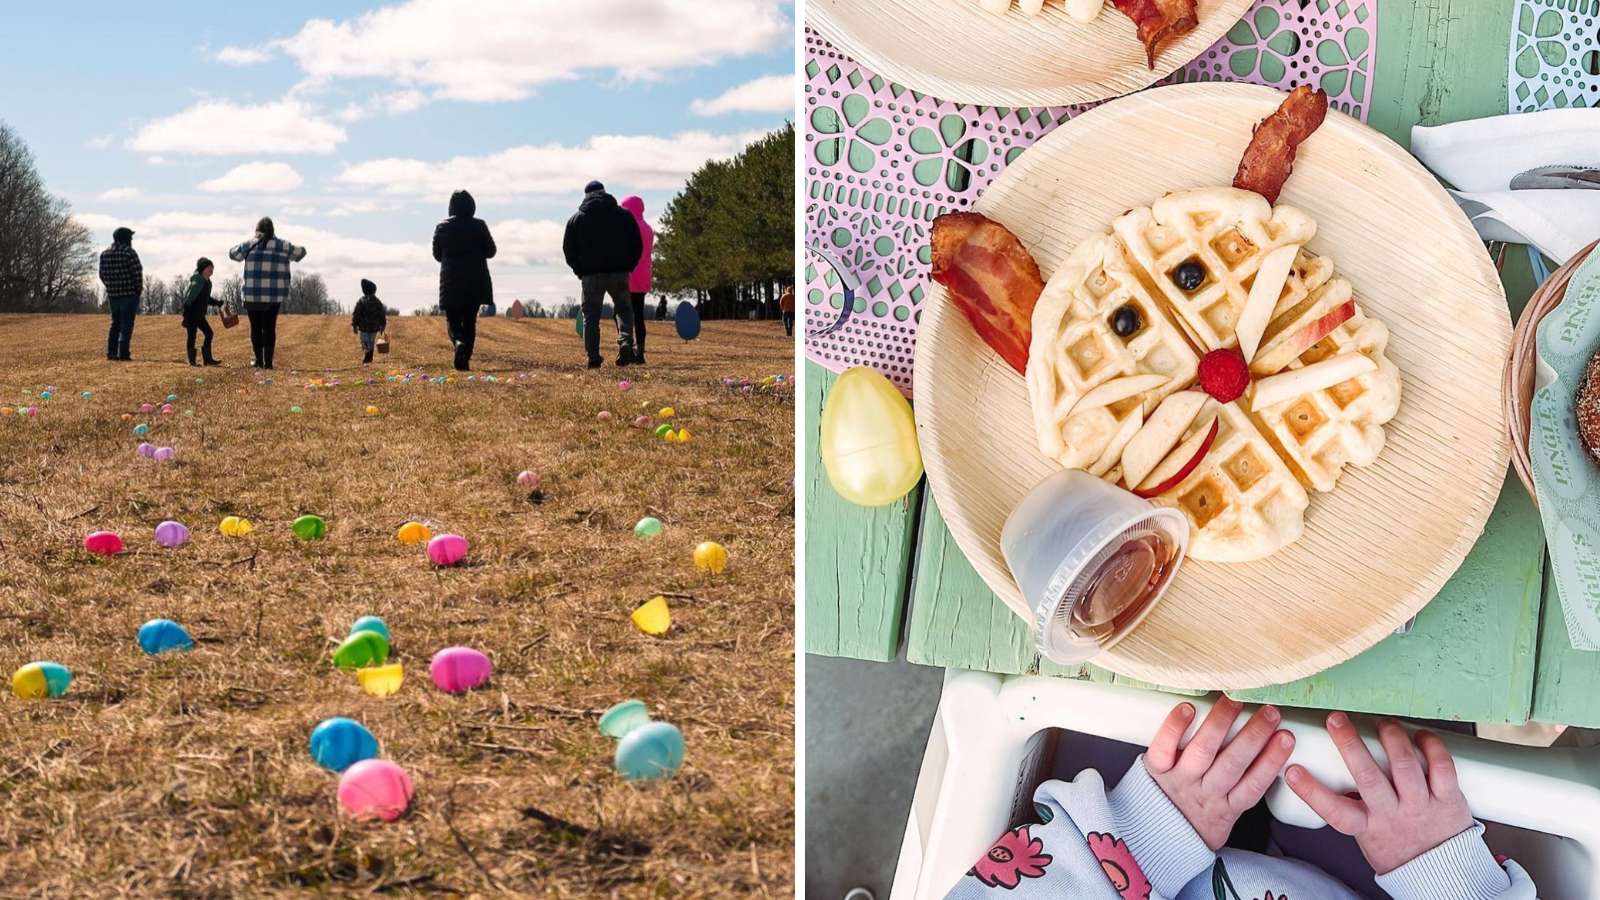 Egg-citing Things To Do On Easter Weekend In Durham Region